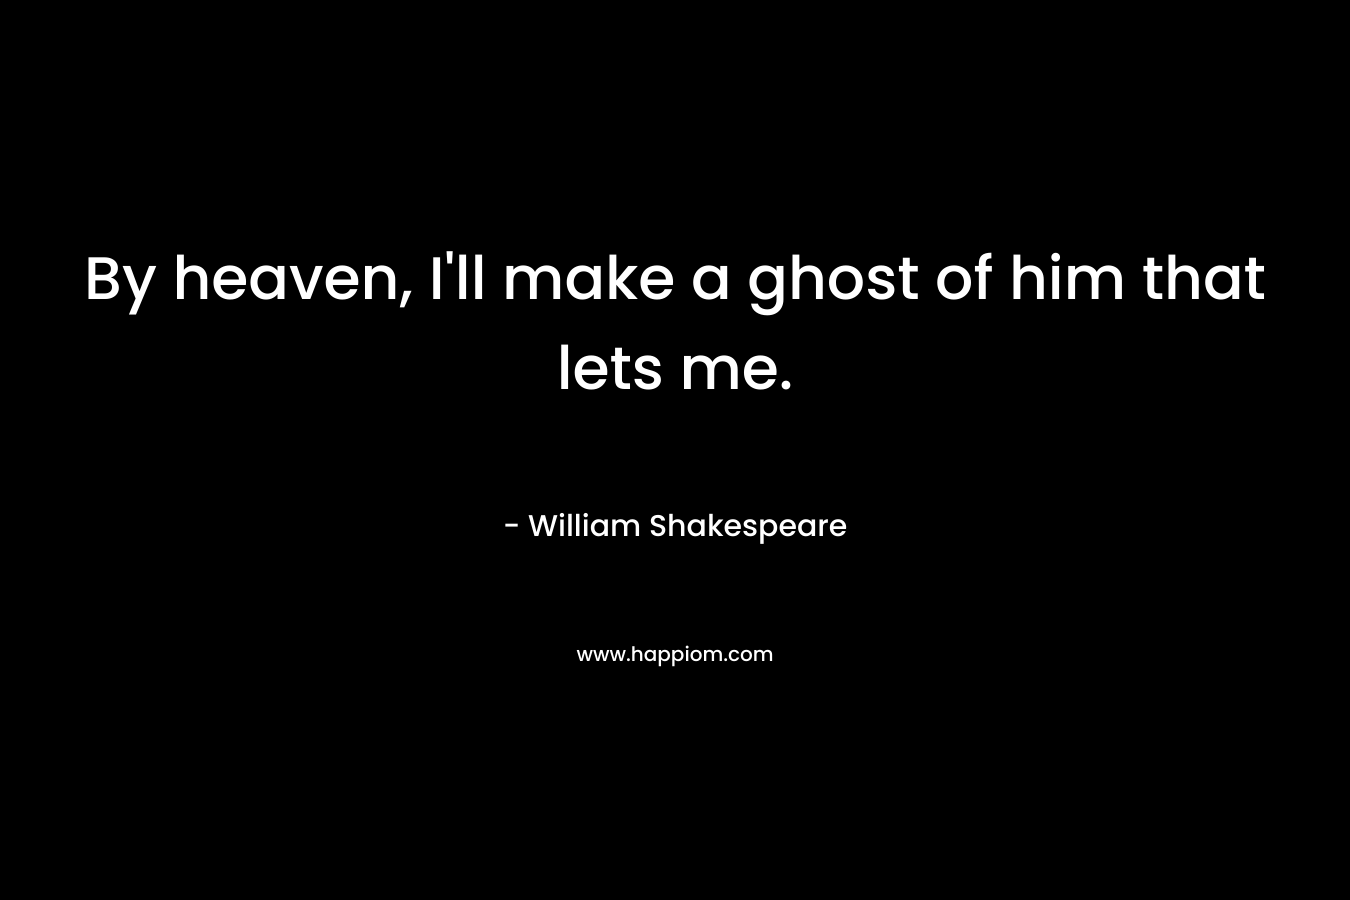 By heaven, I'll make a ghost of him that lets me.